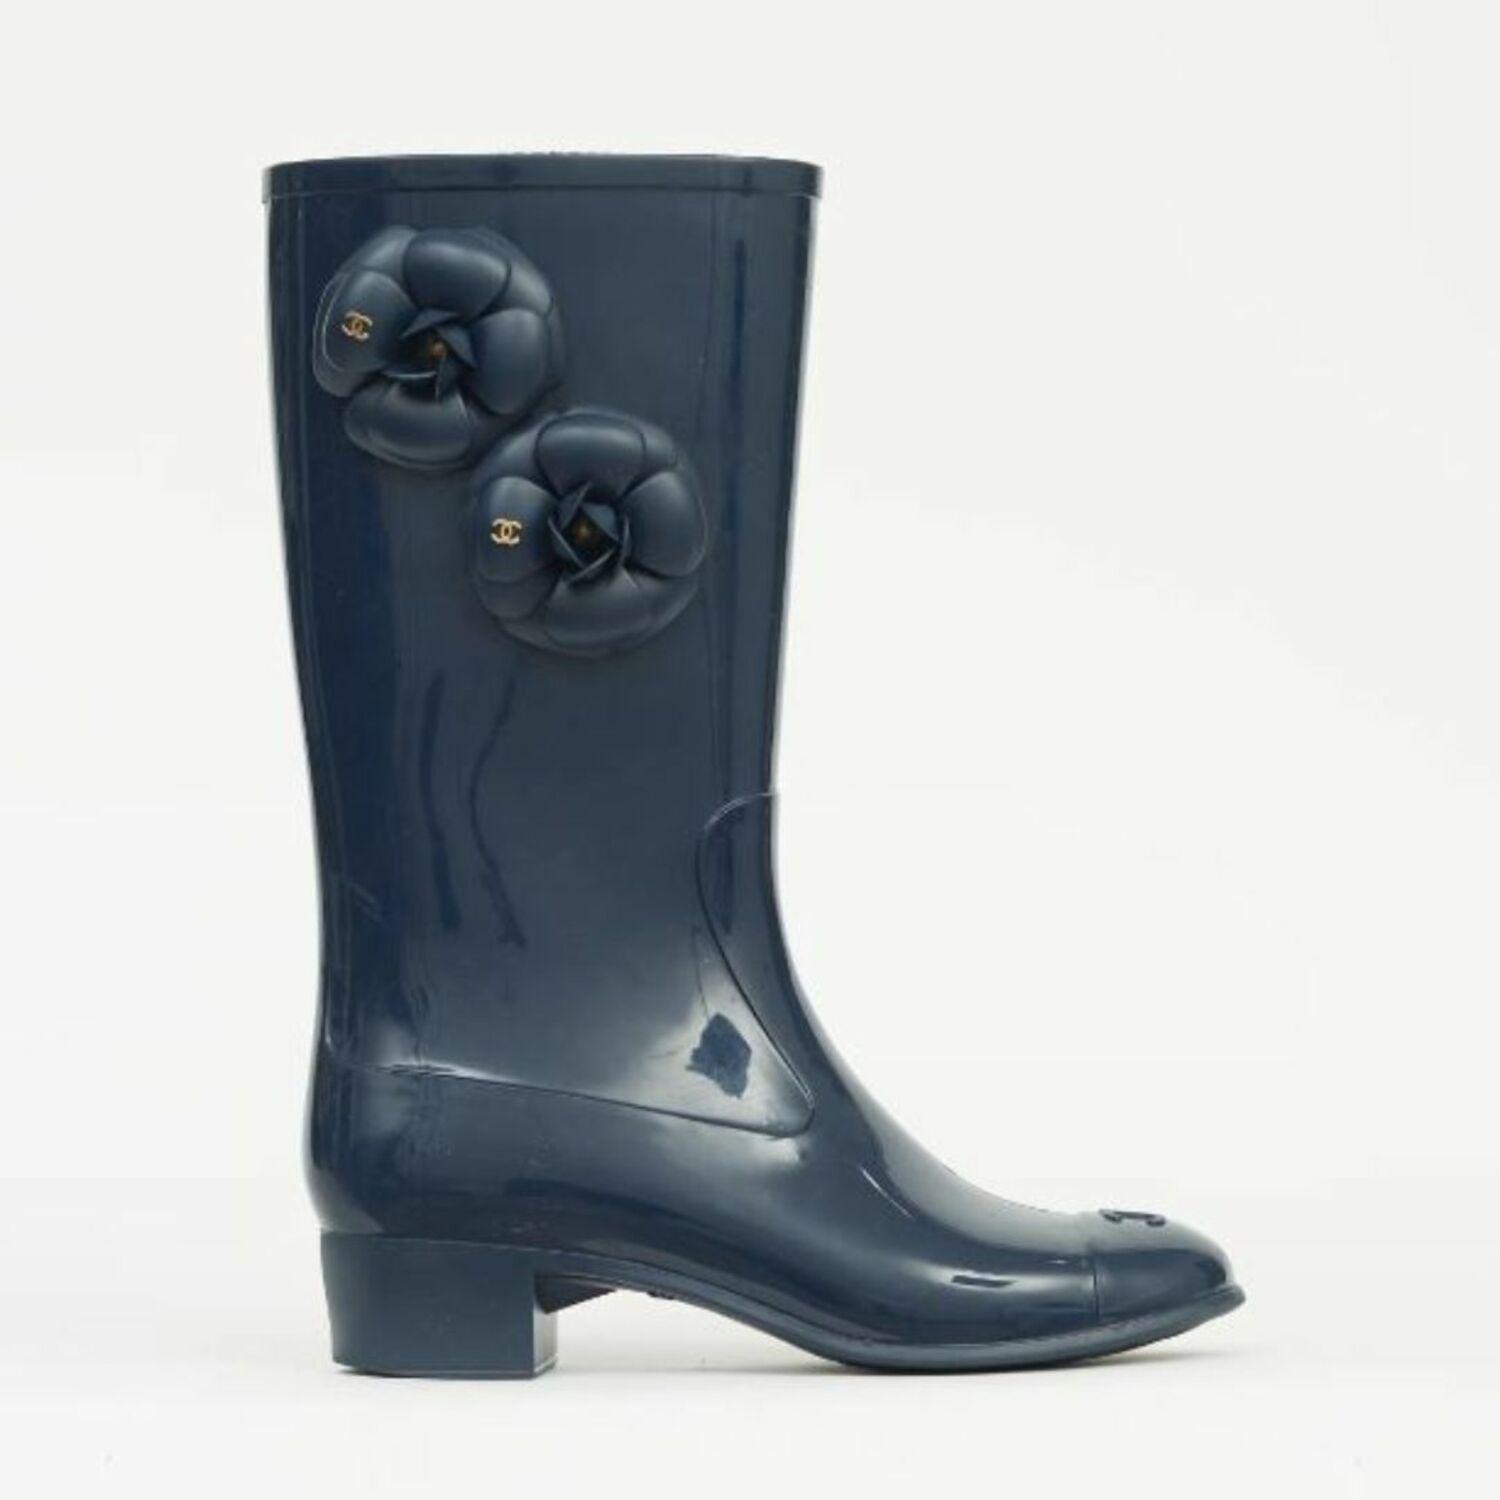 Rubber Rain Boots Chanel - 38, buy pre-owned at 350 EUR